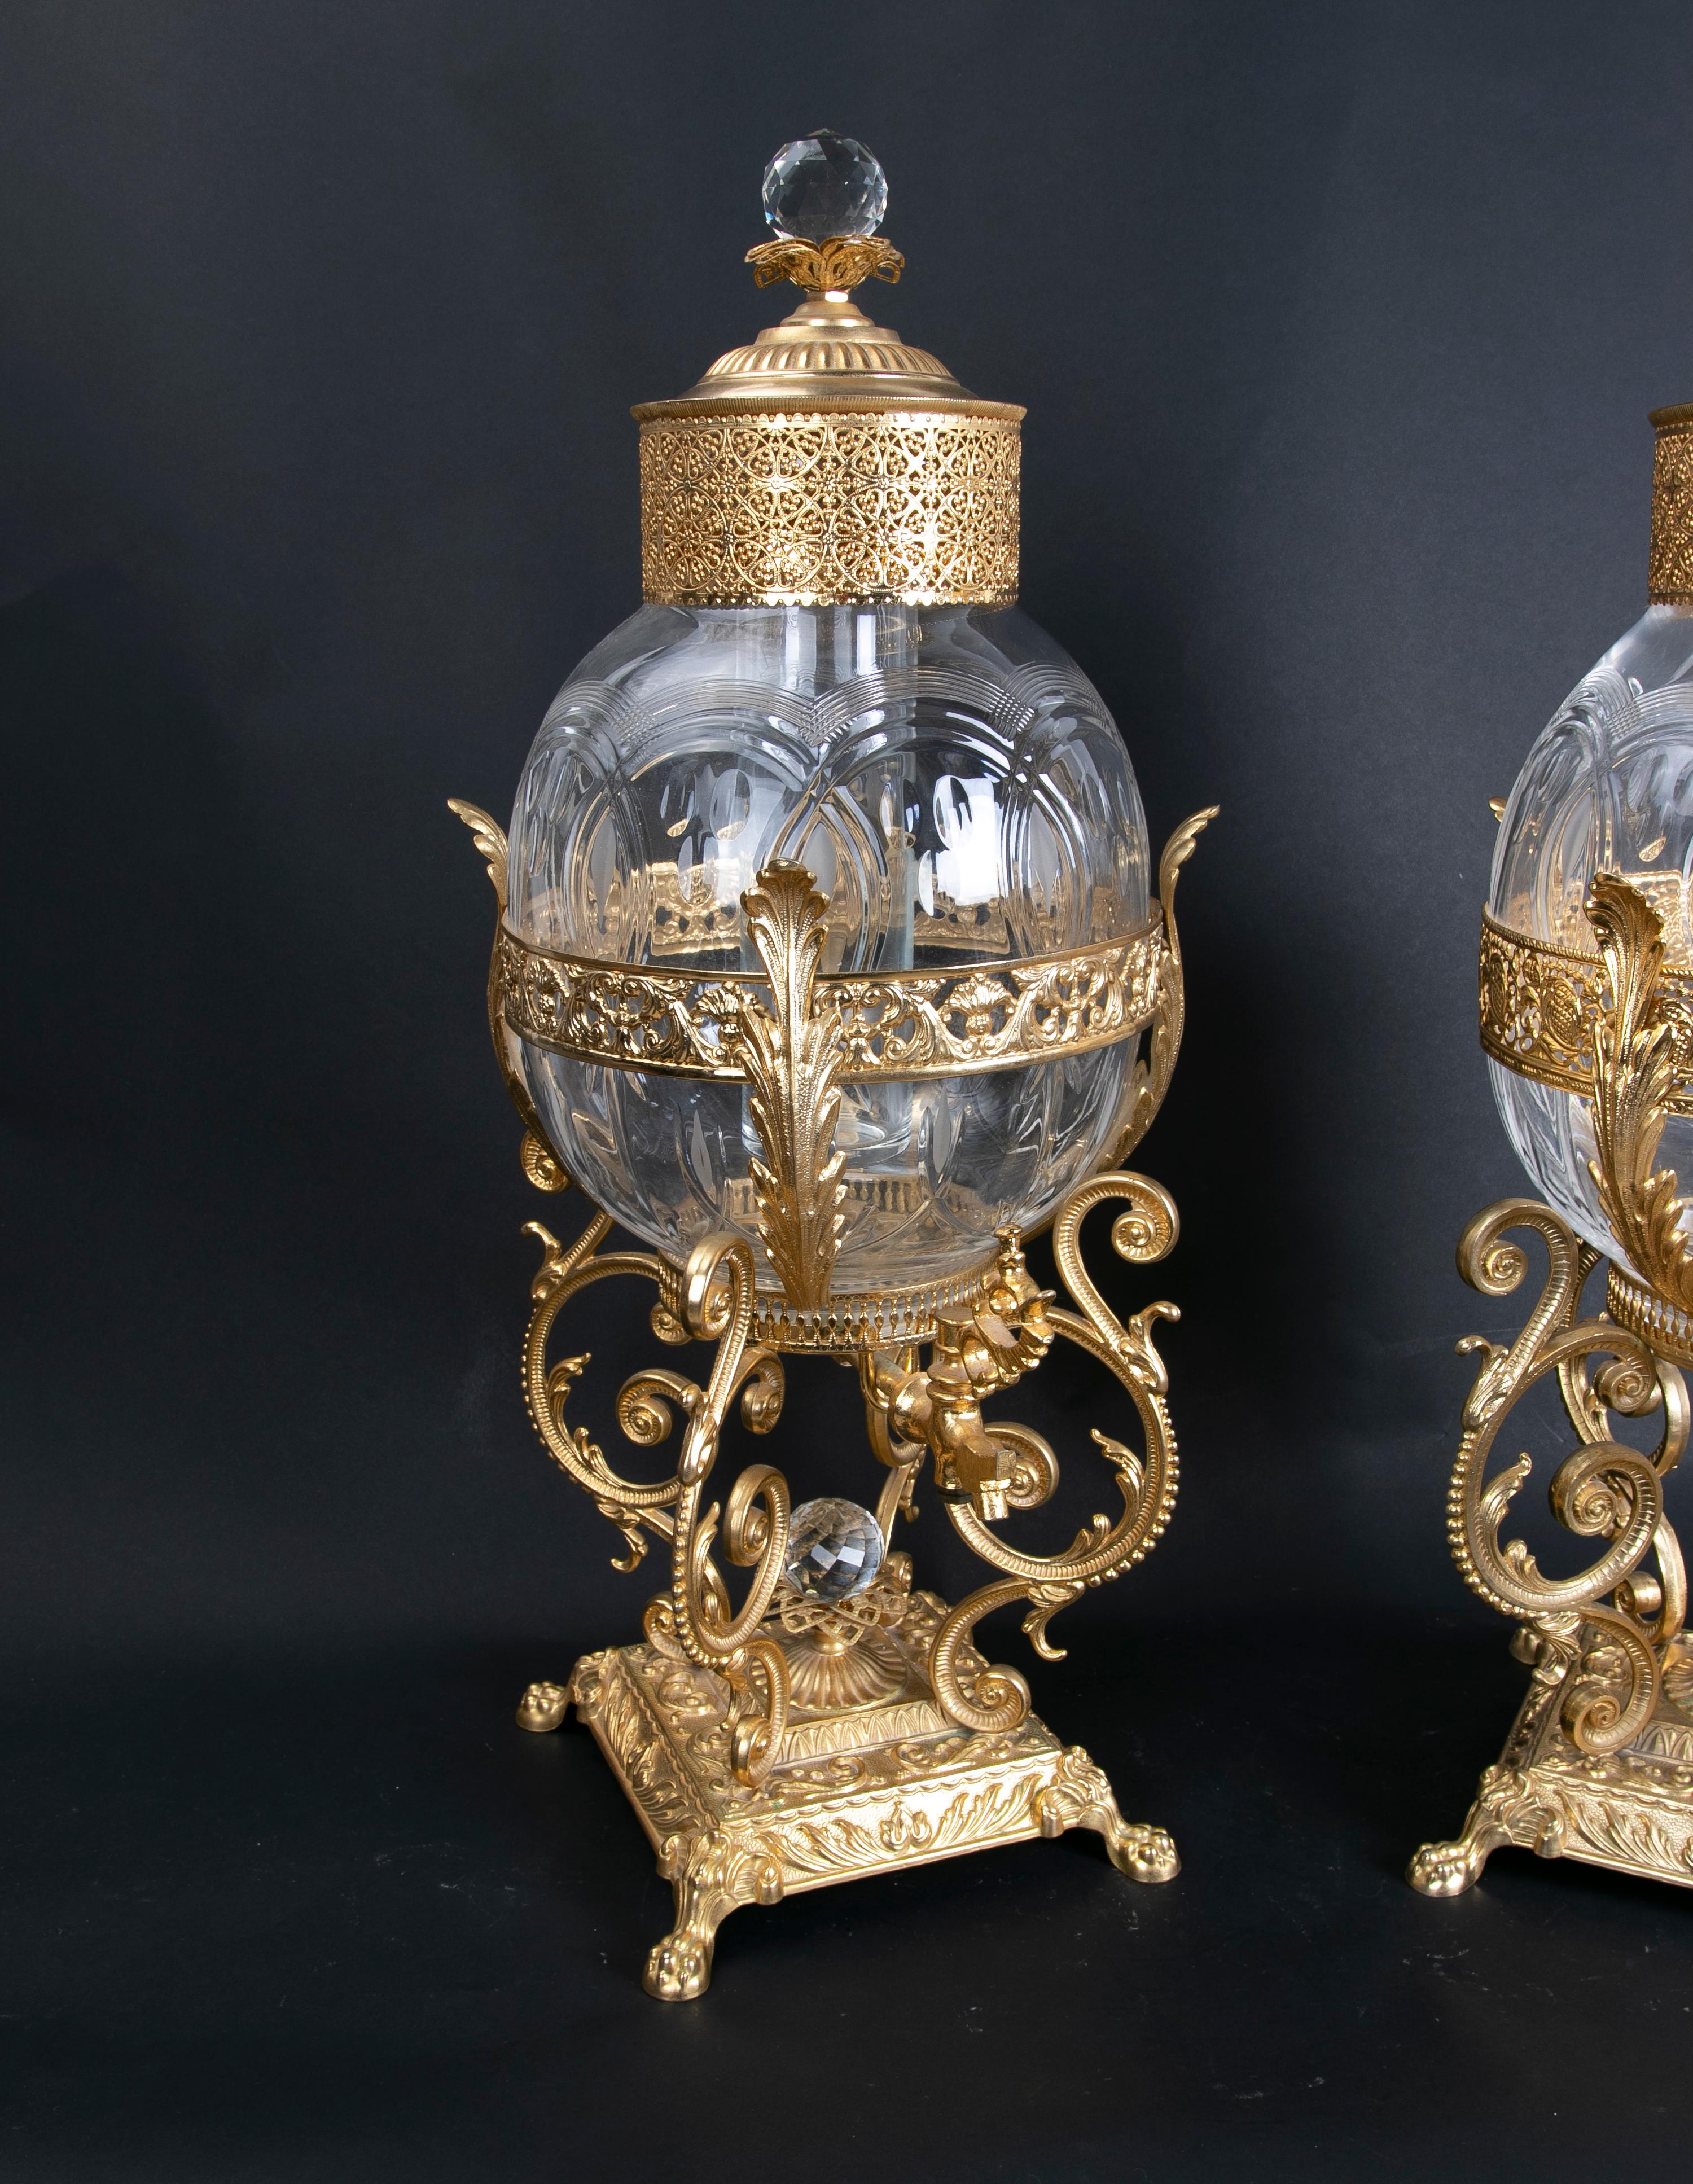 Pair of bronze jars holding lidded glass container.